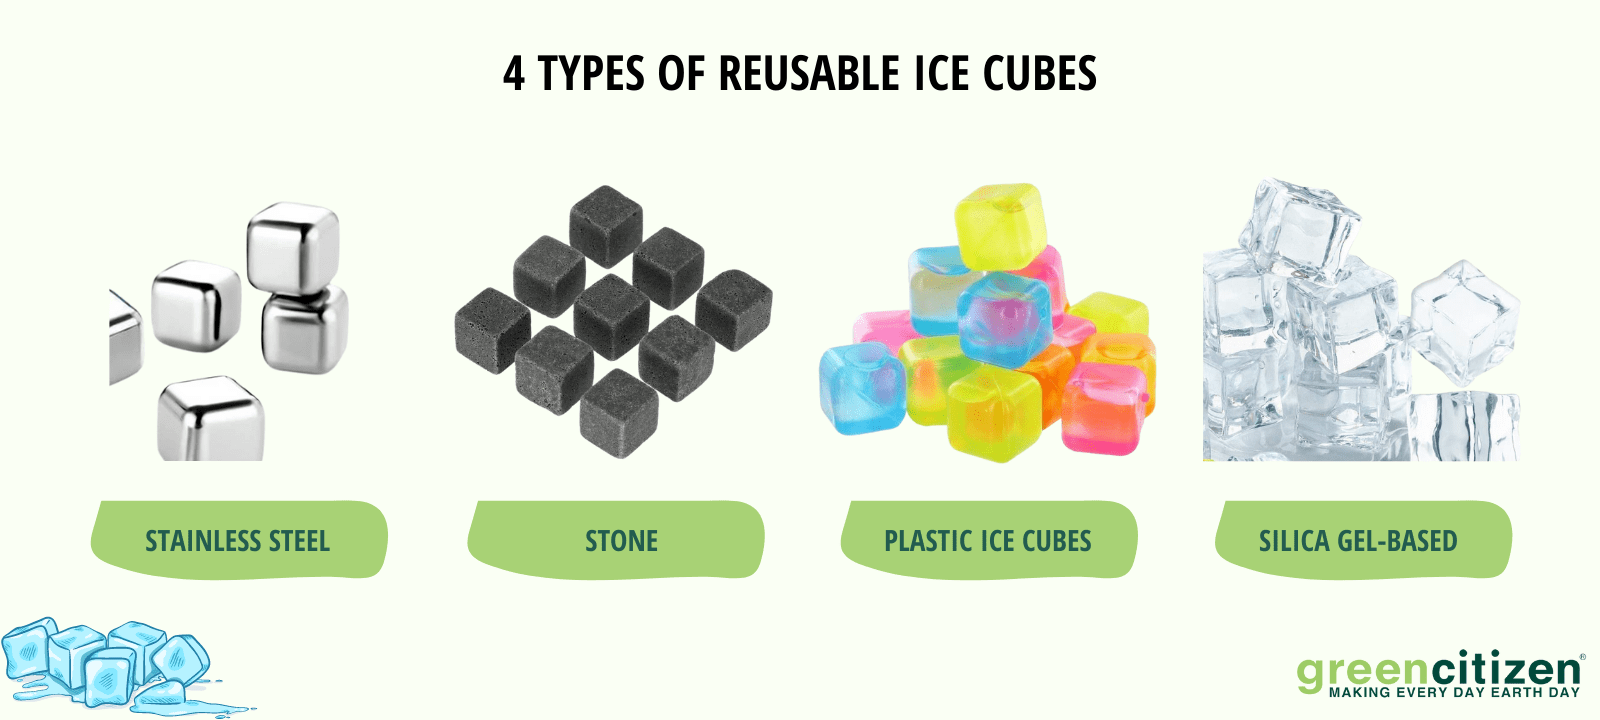 Types of Reusable ice cubes